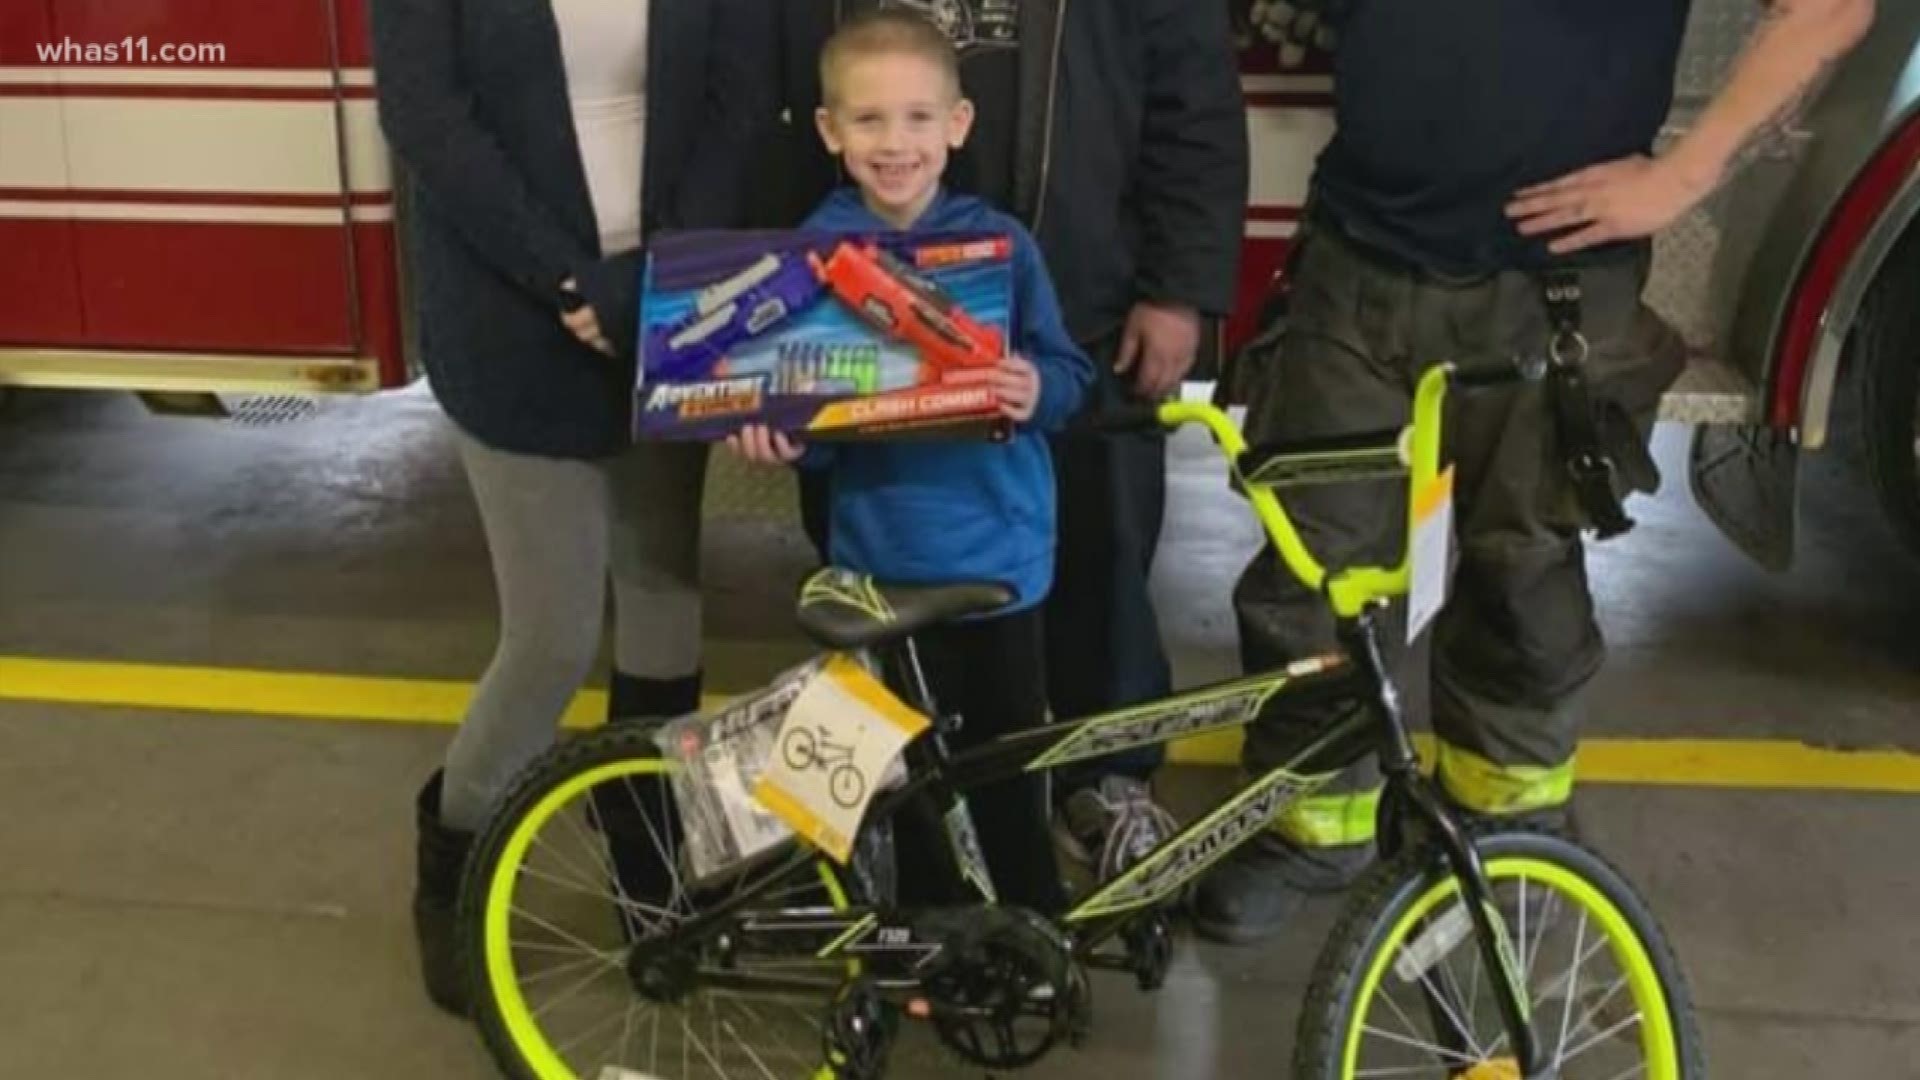 A family in New Albany is sending a special thank you to the fire department for helping put out their shed fire and bringing their son a new bike.